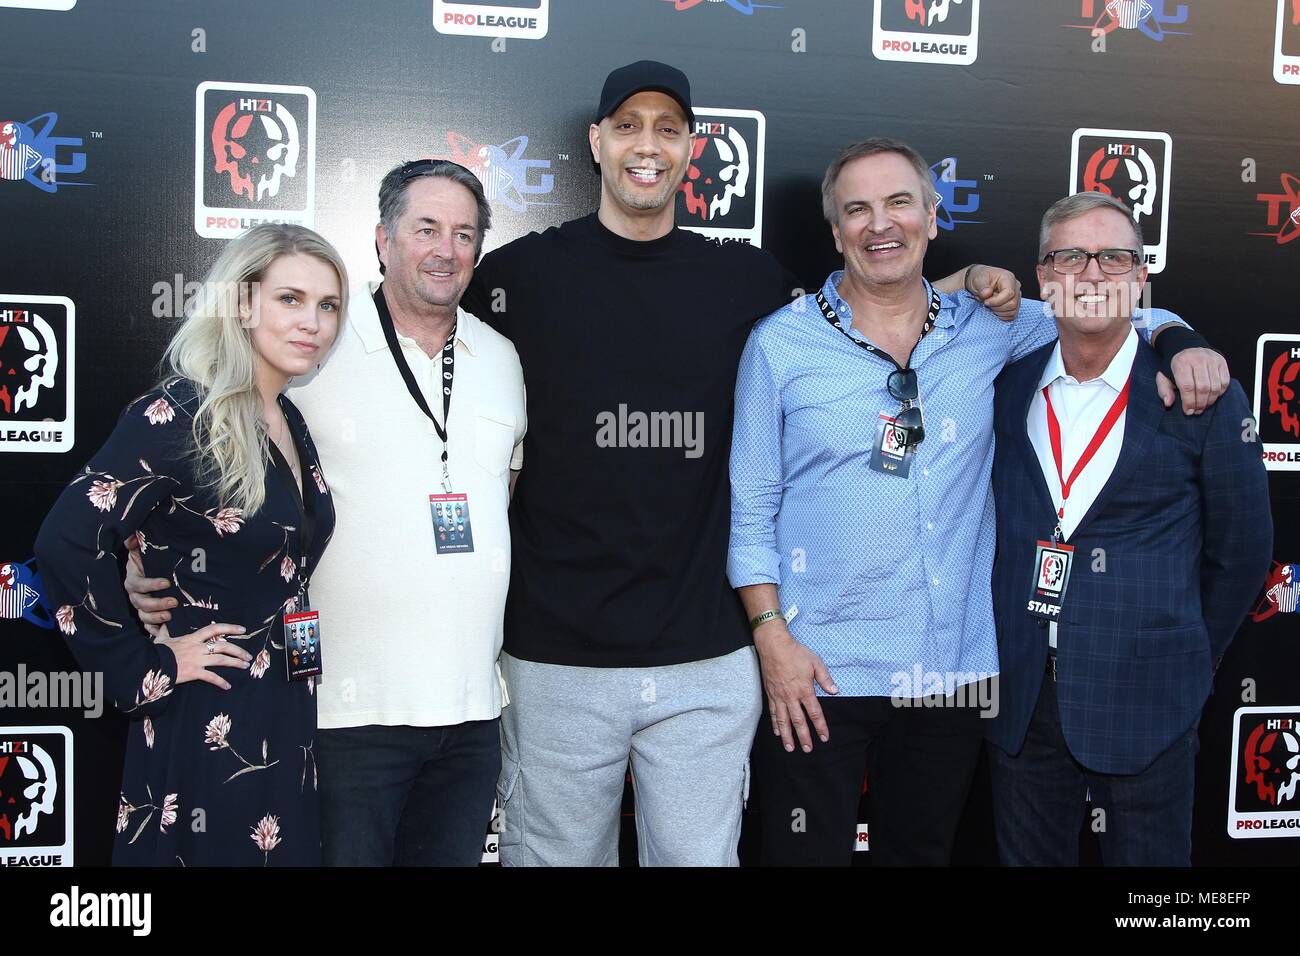 Las Vegas, NV, USA. 21st Apr, 2018. Miranda Charsky, Chris Nordling, Jace Hall, Stratton Sclavos and Mike Mosholder at arrivals for H1Z1 Pro League's Inaugural Season Kick Off, Twin Galaxies Esports Center at Caesars, Las Vegas, NV April 21, 2018. Credit: JA/Everett Collection/Alamy Live News Stock Photo